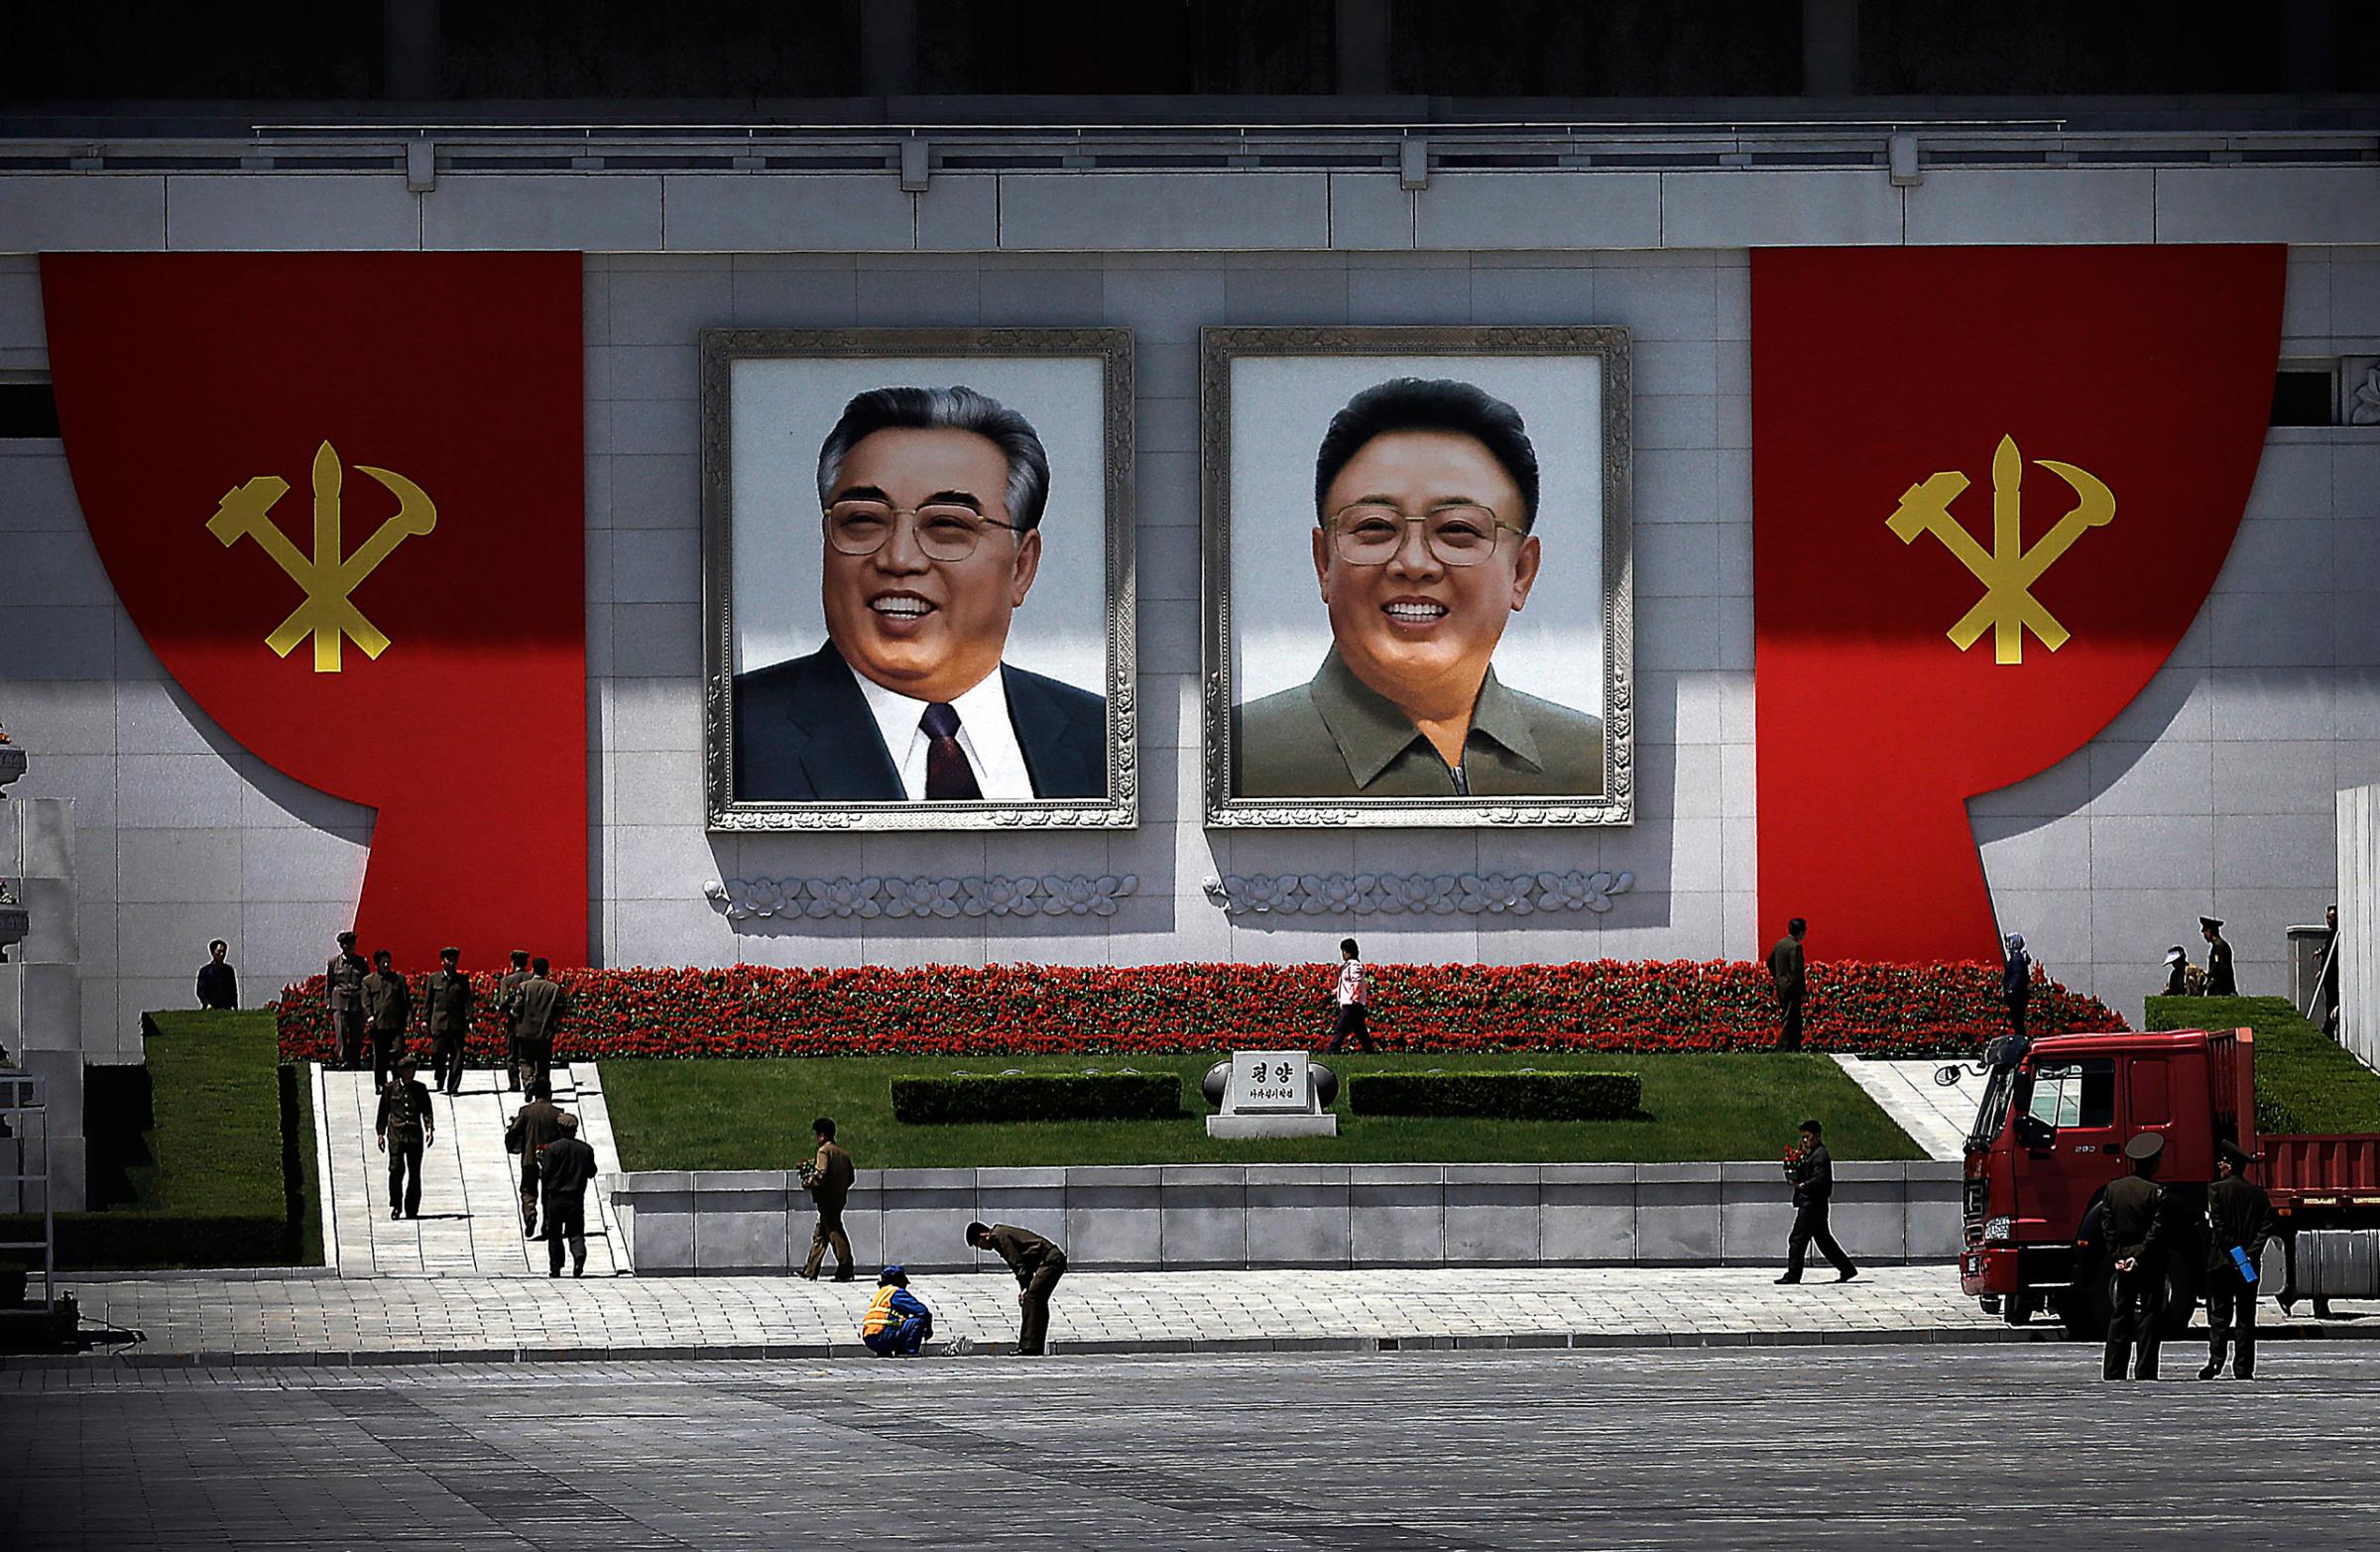 The ruling Workers' Party symbols are erected by the portraits of the late North Korean leaders Kim Il Sung, left, and Kim Jong Il while workers decorate the vicinity with flowers at the Kim Il Sung Square Saturday, May 7, 2016 in Pyongyang, North Korea. North Korean leader Kim Jong Un hailed his country's recent nuclear test to uproarious applause as he convened the first full congress of its ruling party since 1980, an event intended to showcase the North's stability and unity in the face of tough international sanctions and deepening isolation. (AP Photo/Wong Maye-E)